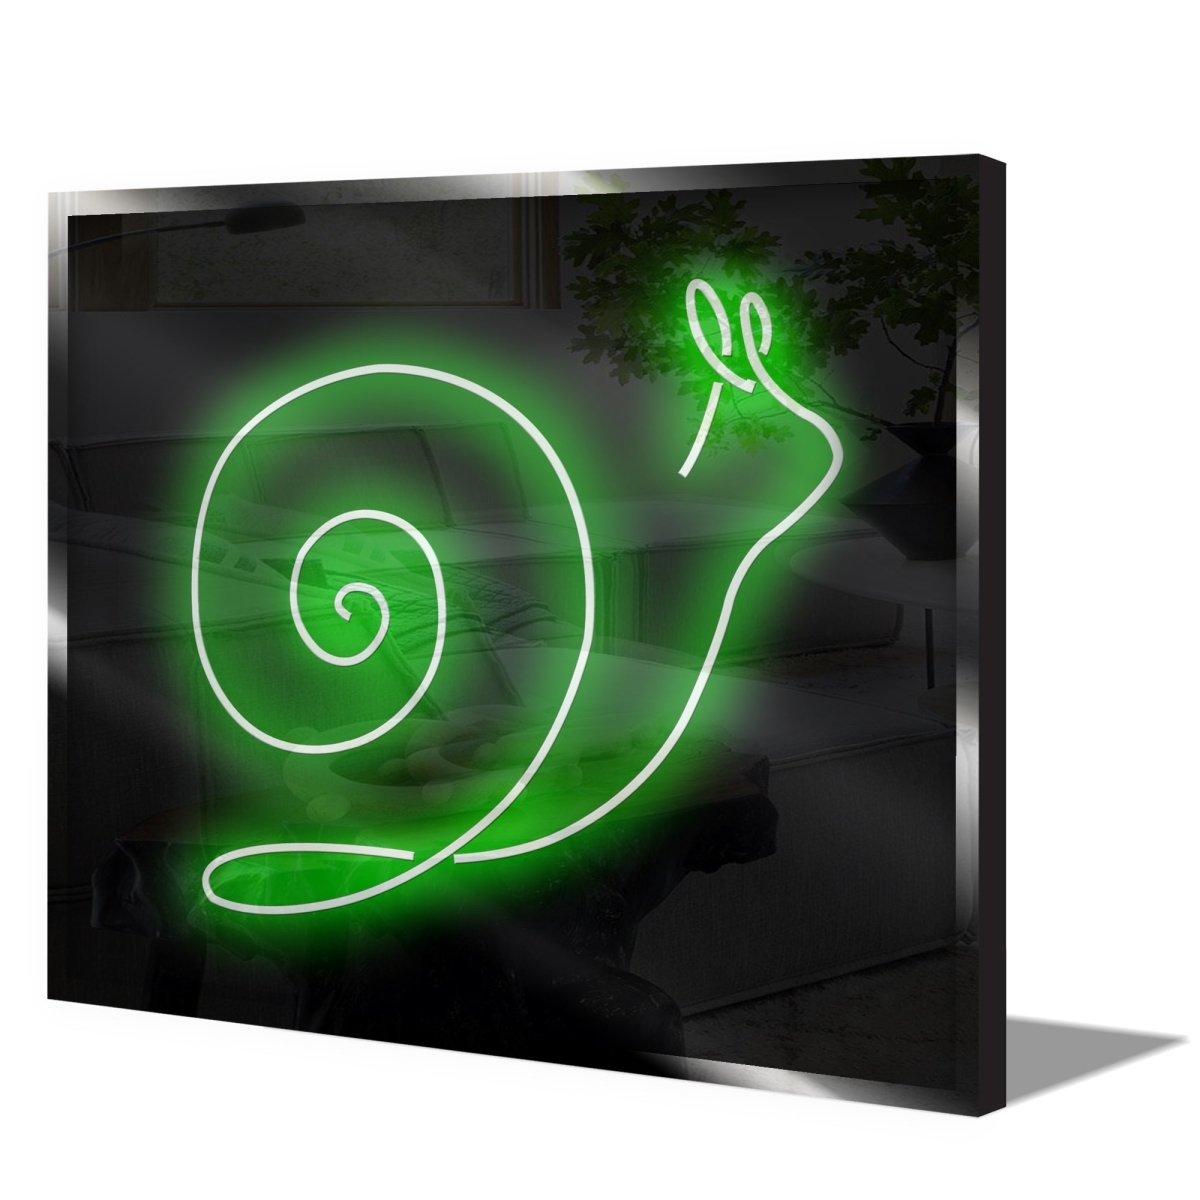 Personalised LED Neon Sign SNAIL - madaboutneon